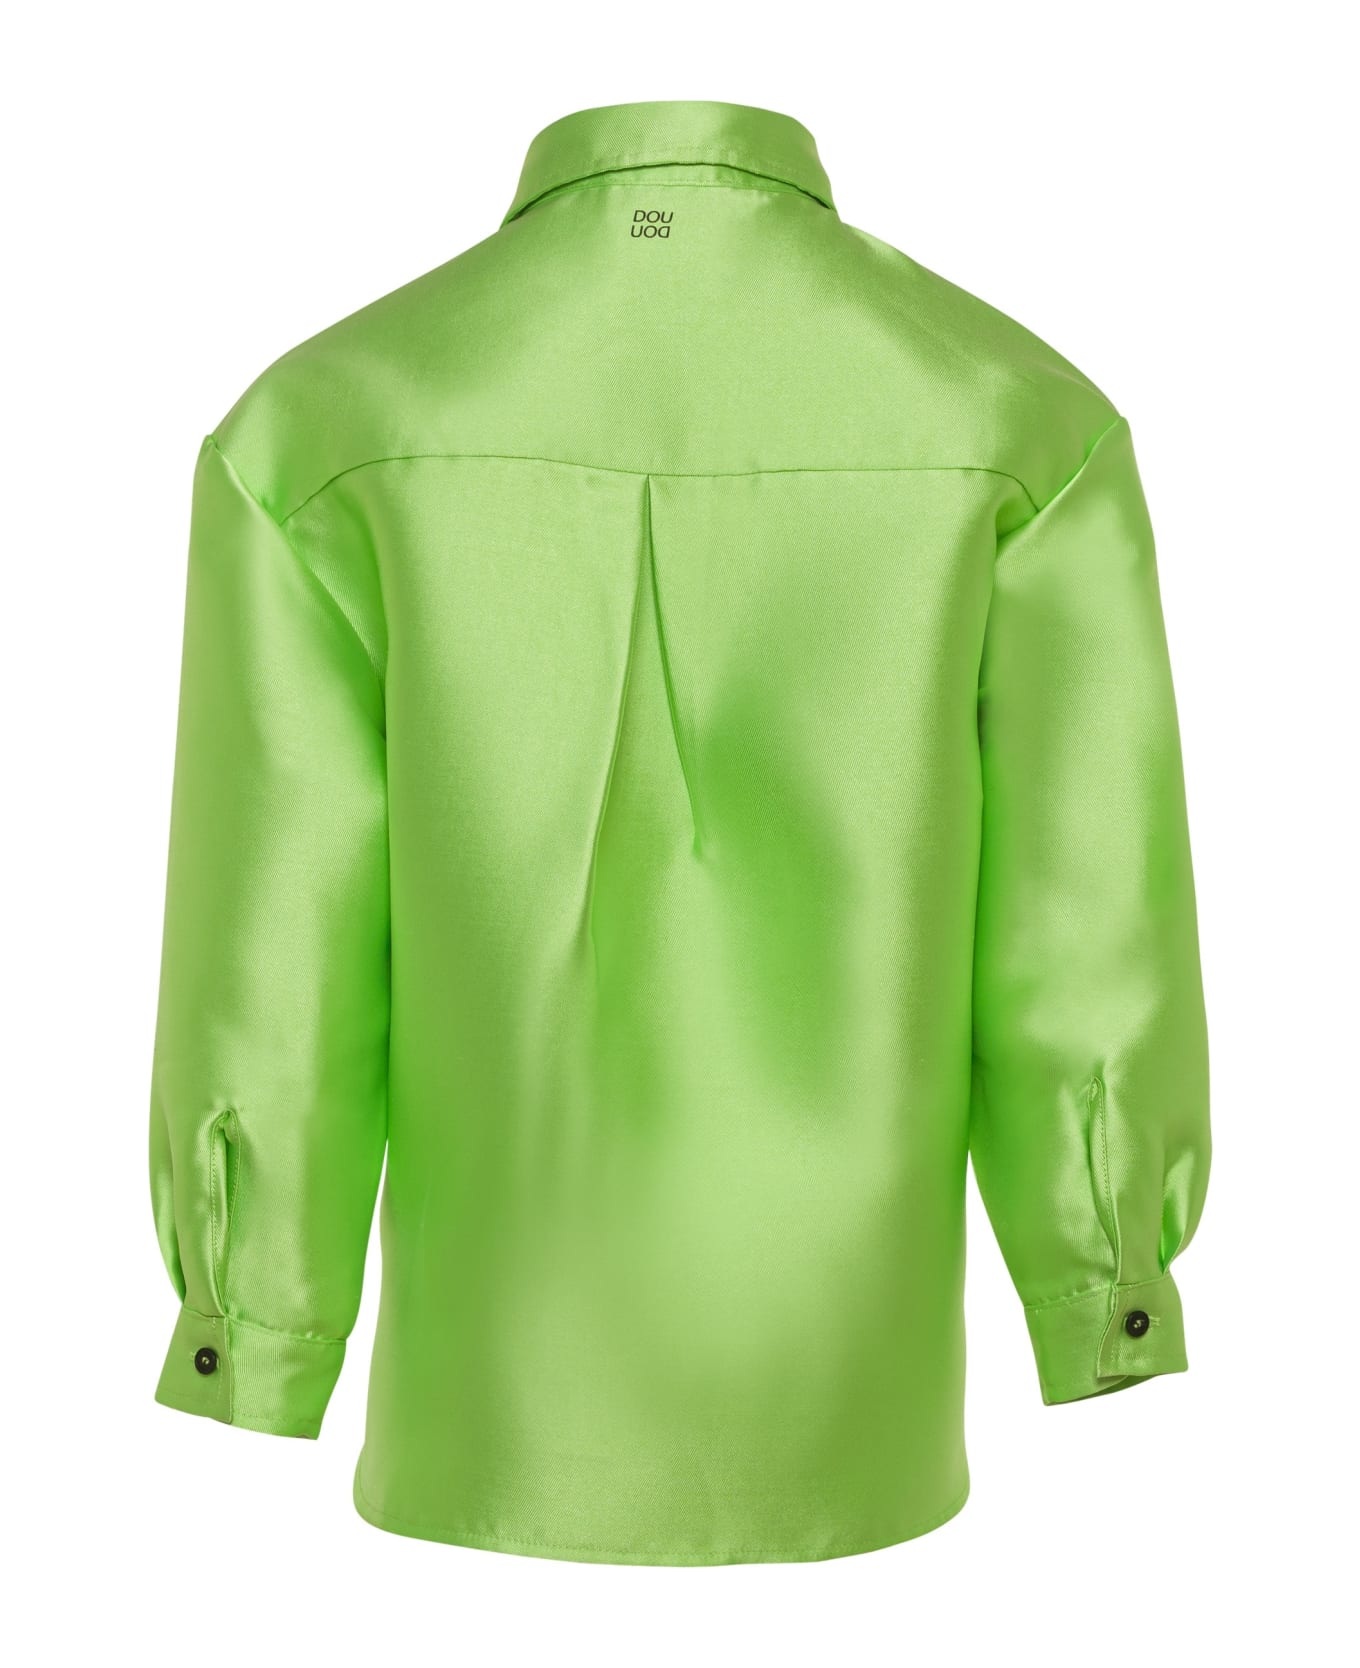 Douuod Shirt With Satin Effect - Green シャツ